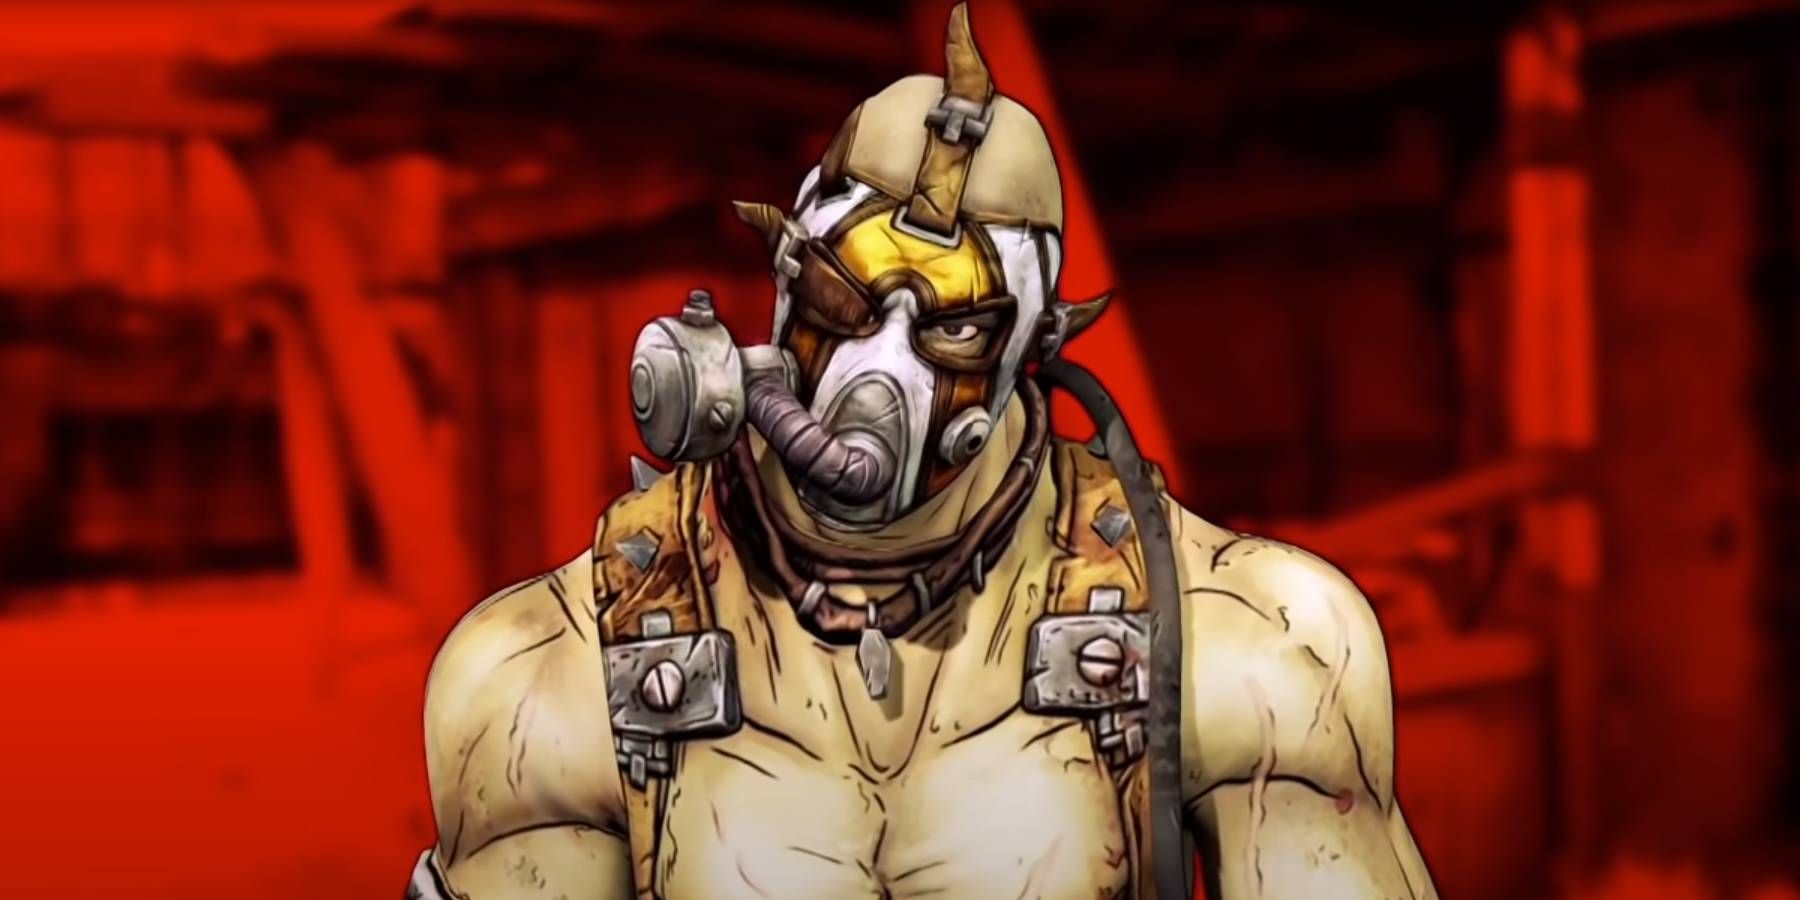 Borderlands 2 Krieg, o personagem psicopata do trailer DLC "A Meat Bicycle Built for Two"